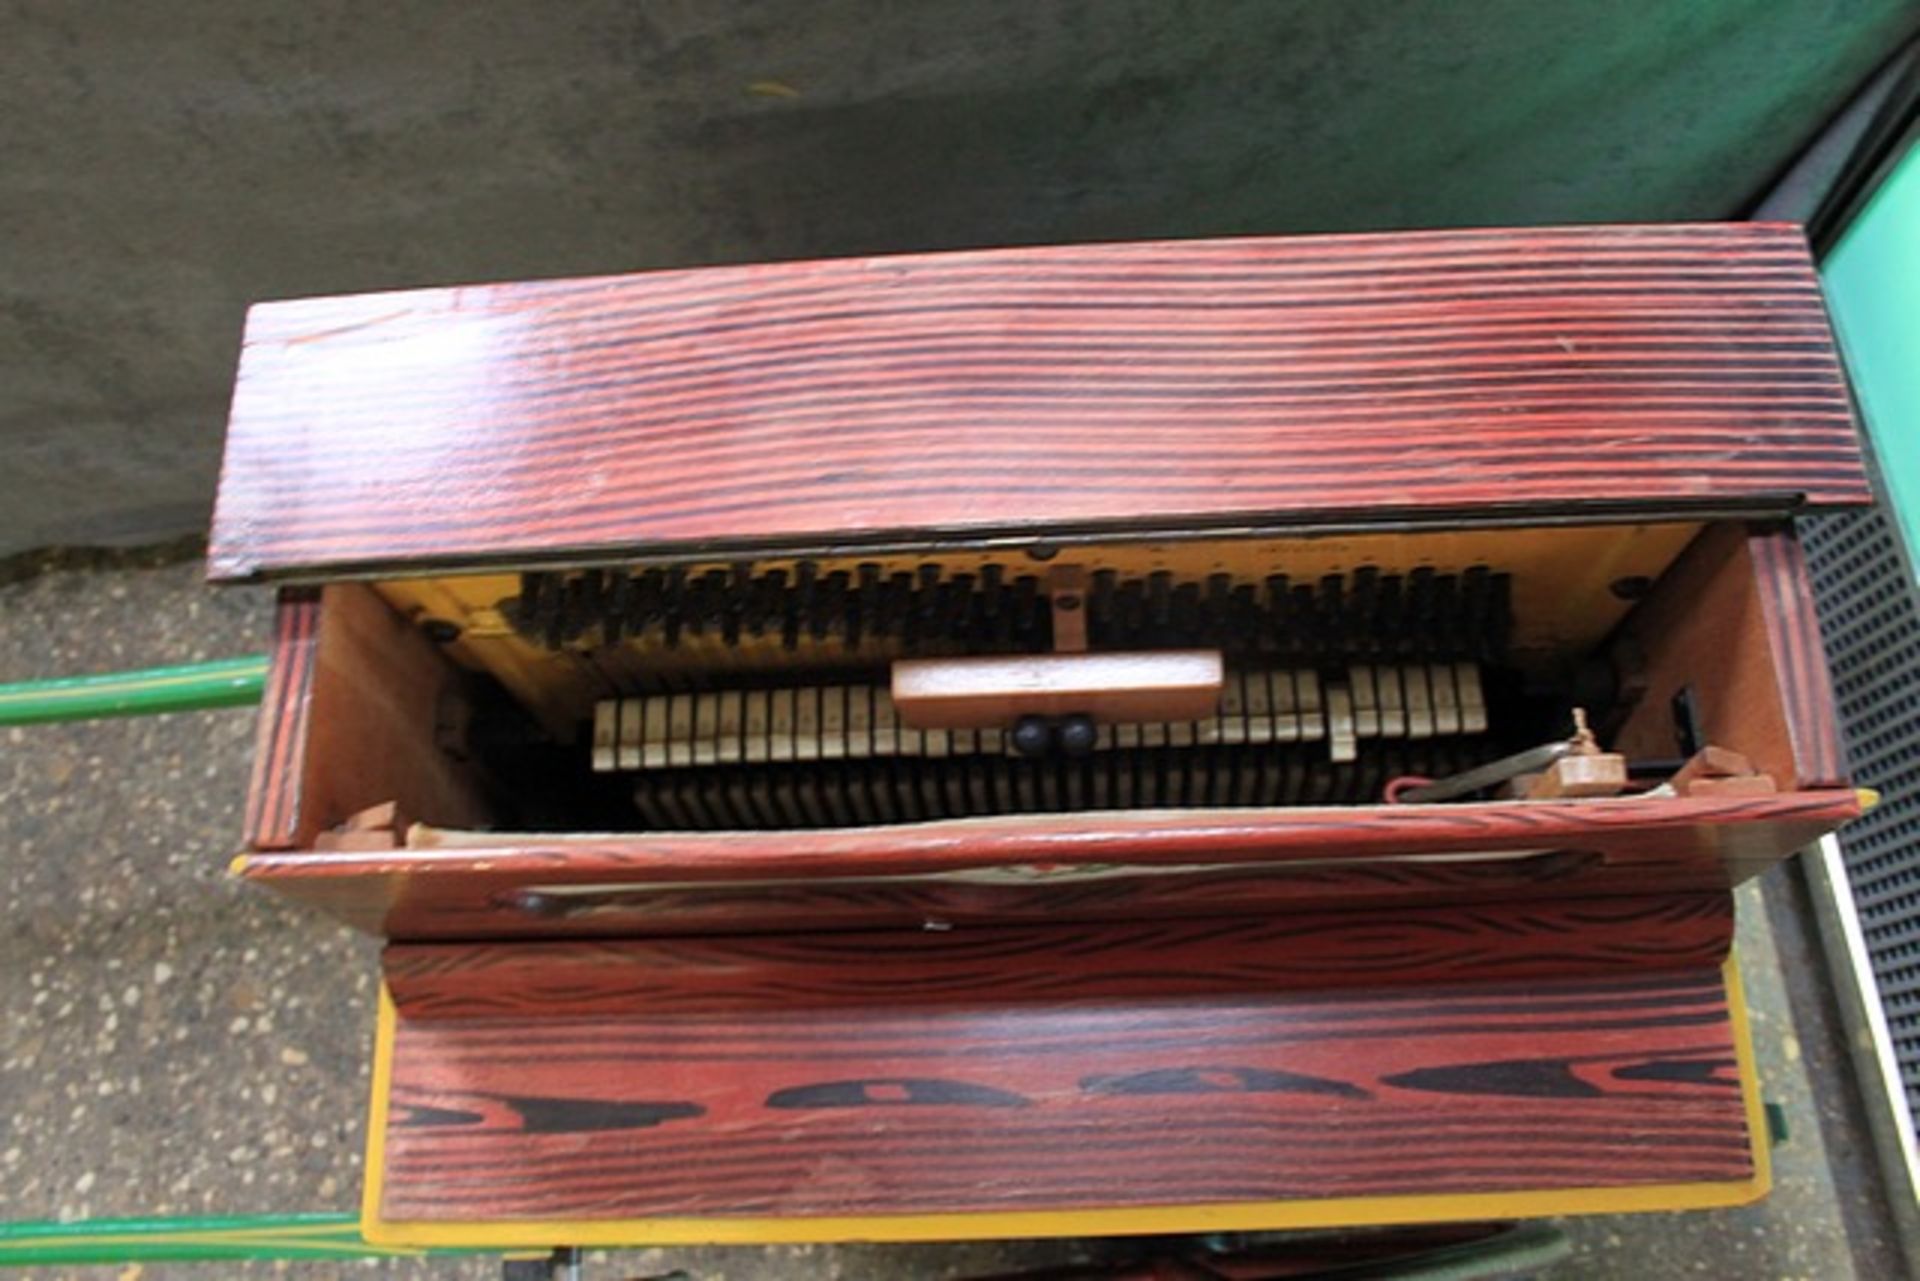 Vicente Llinares Faventia Barcelona Organ With Wagon Cart, Miniature Of The "Hurdy Gurdy" Street - Image 2 of 5